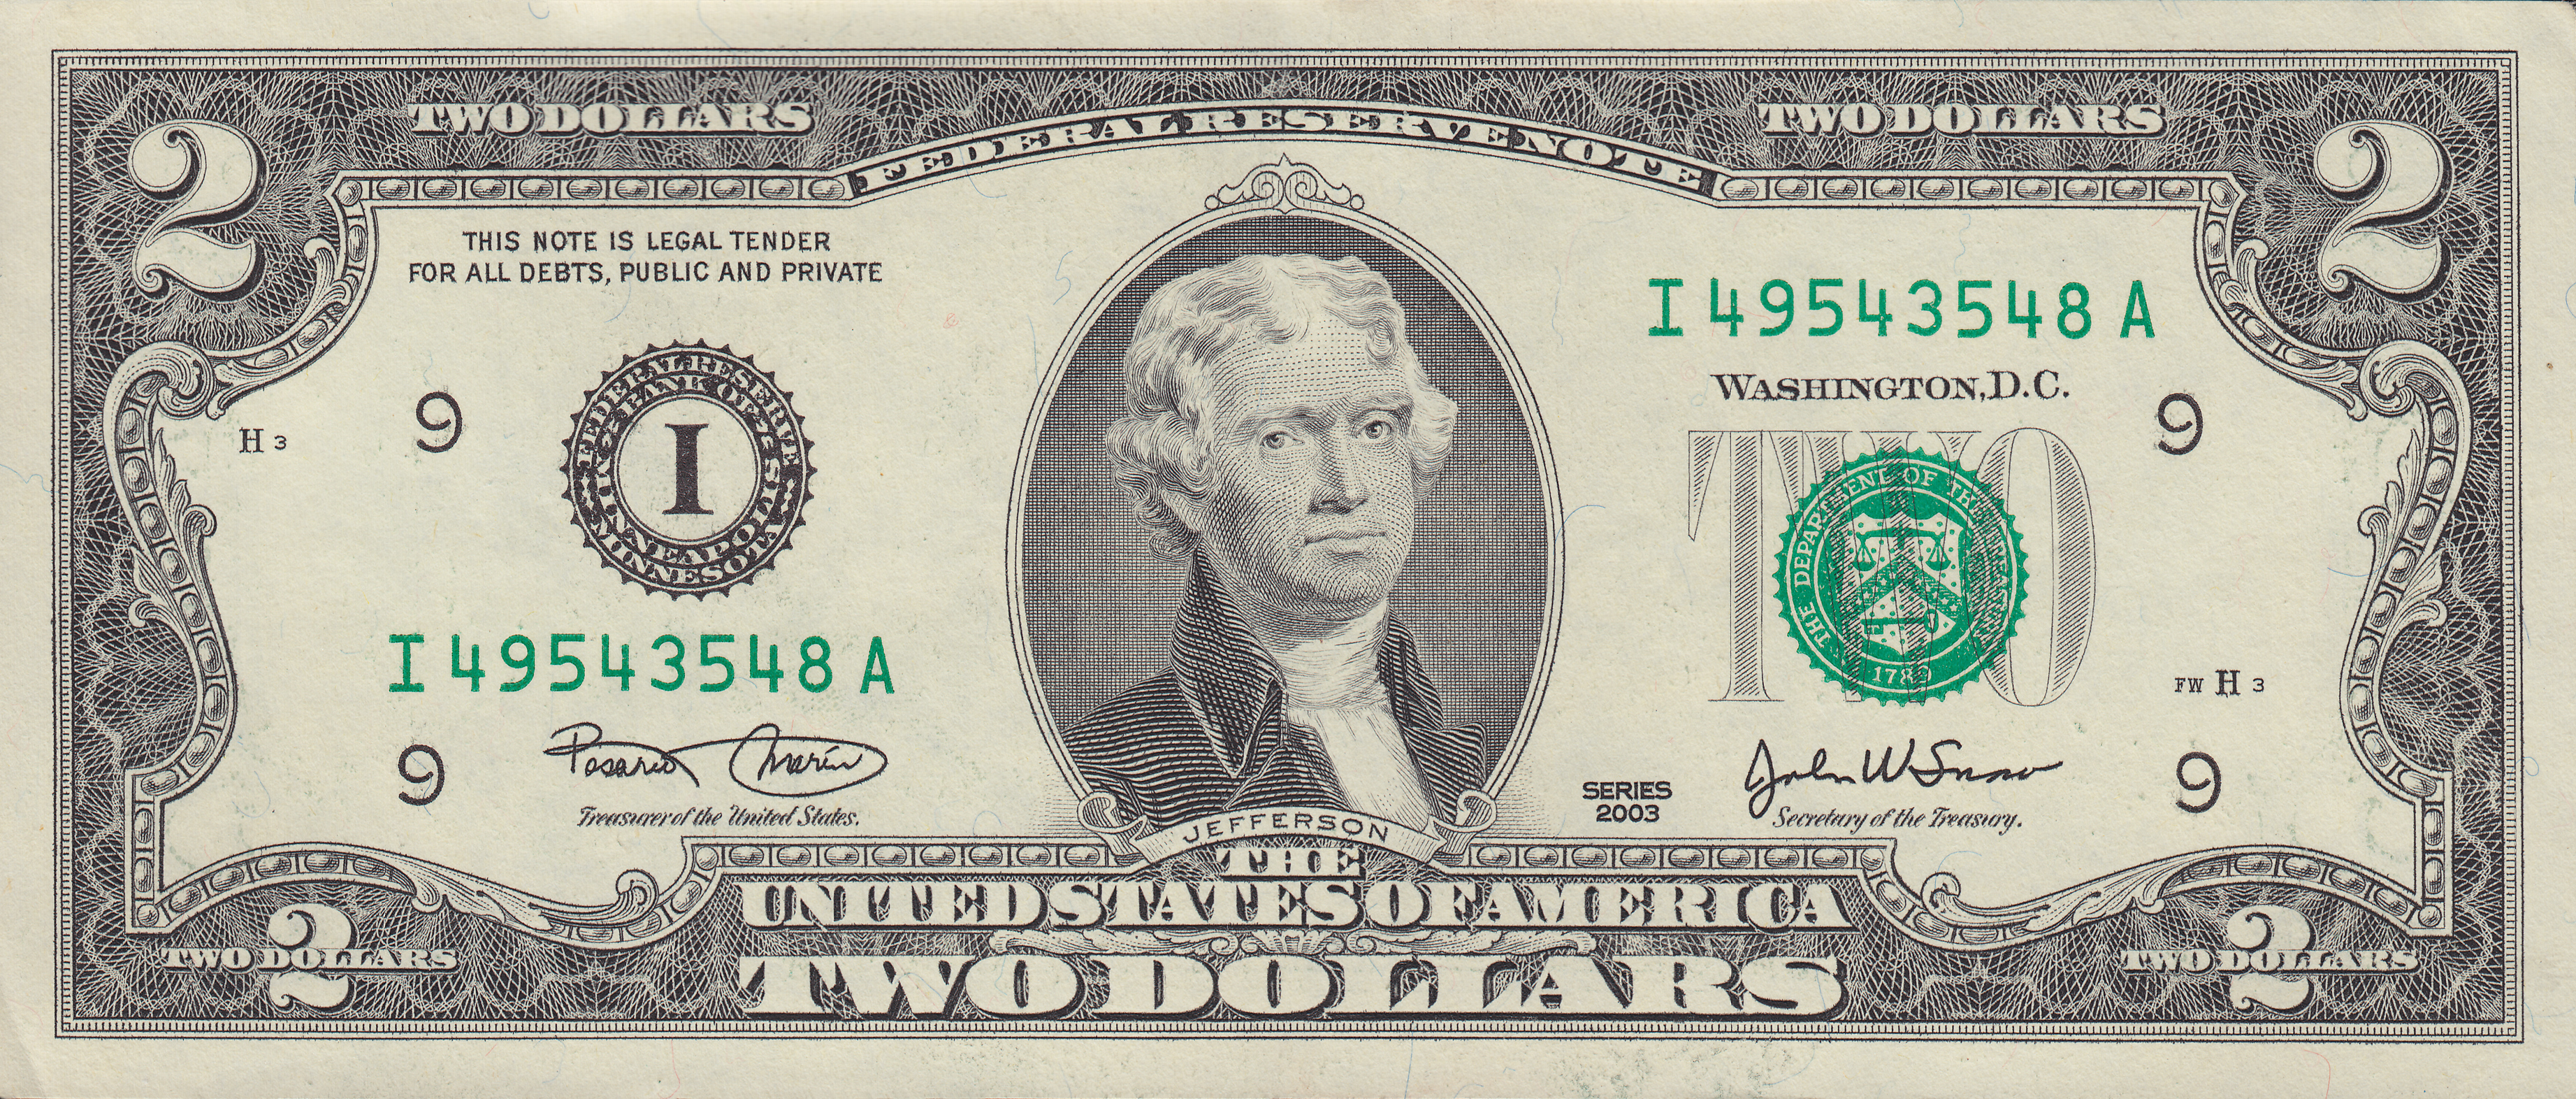 U.S. Third President Thomas Jefferson featured on the obverse of the two dollar note.